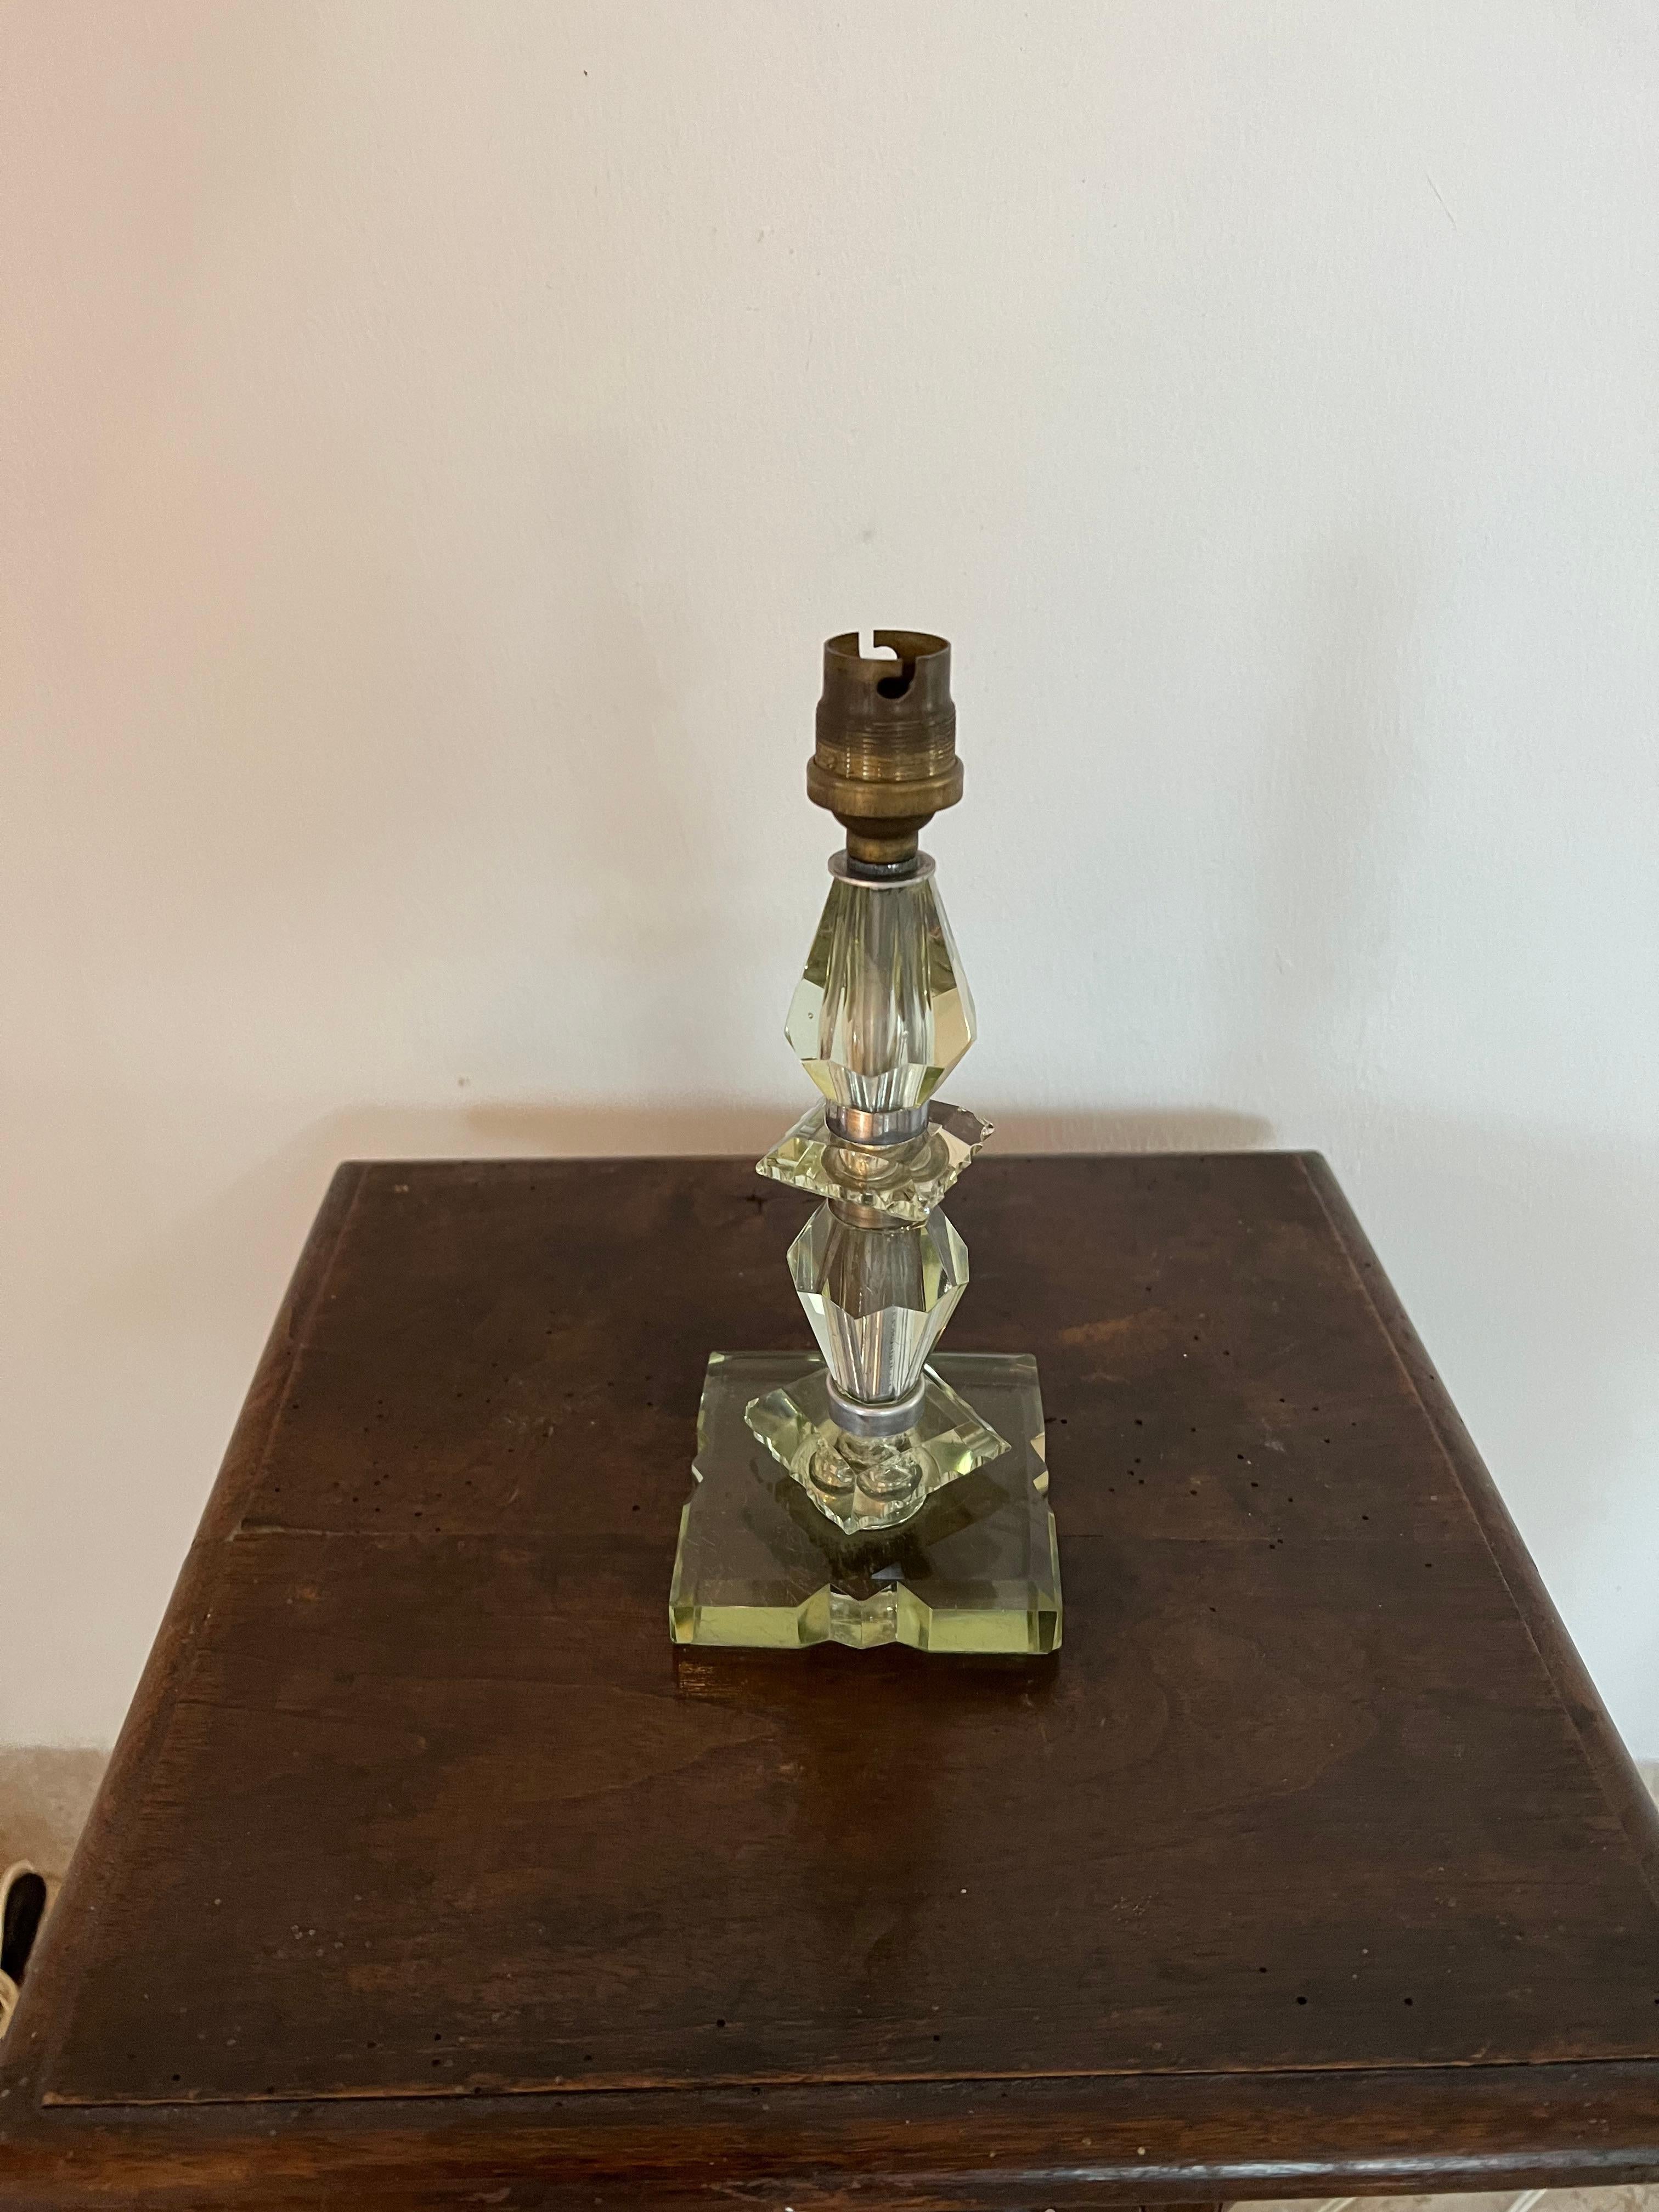 Beautiful Art Deco table lamp in the style of Baccarat and Jacques Adnet, unmarked.
Manufactured in hand cut, slightly green Lead glass.
France circa 1940.
The pieces 